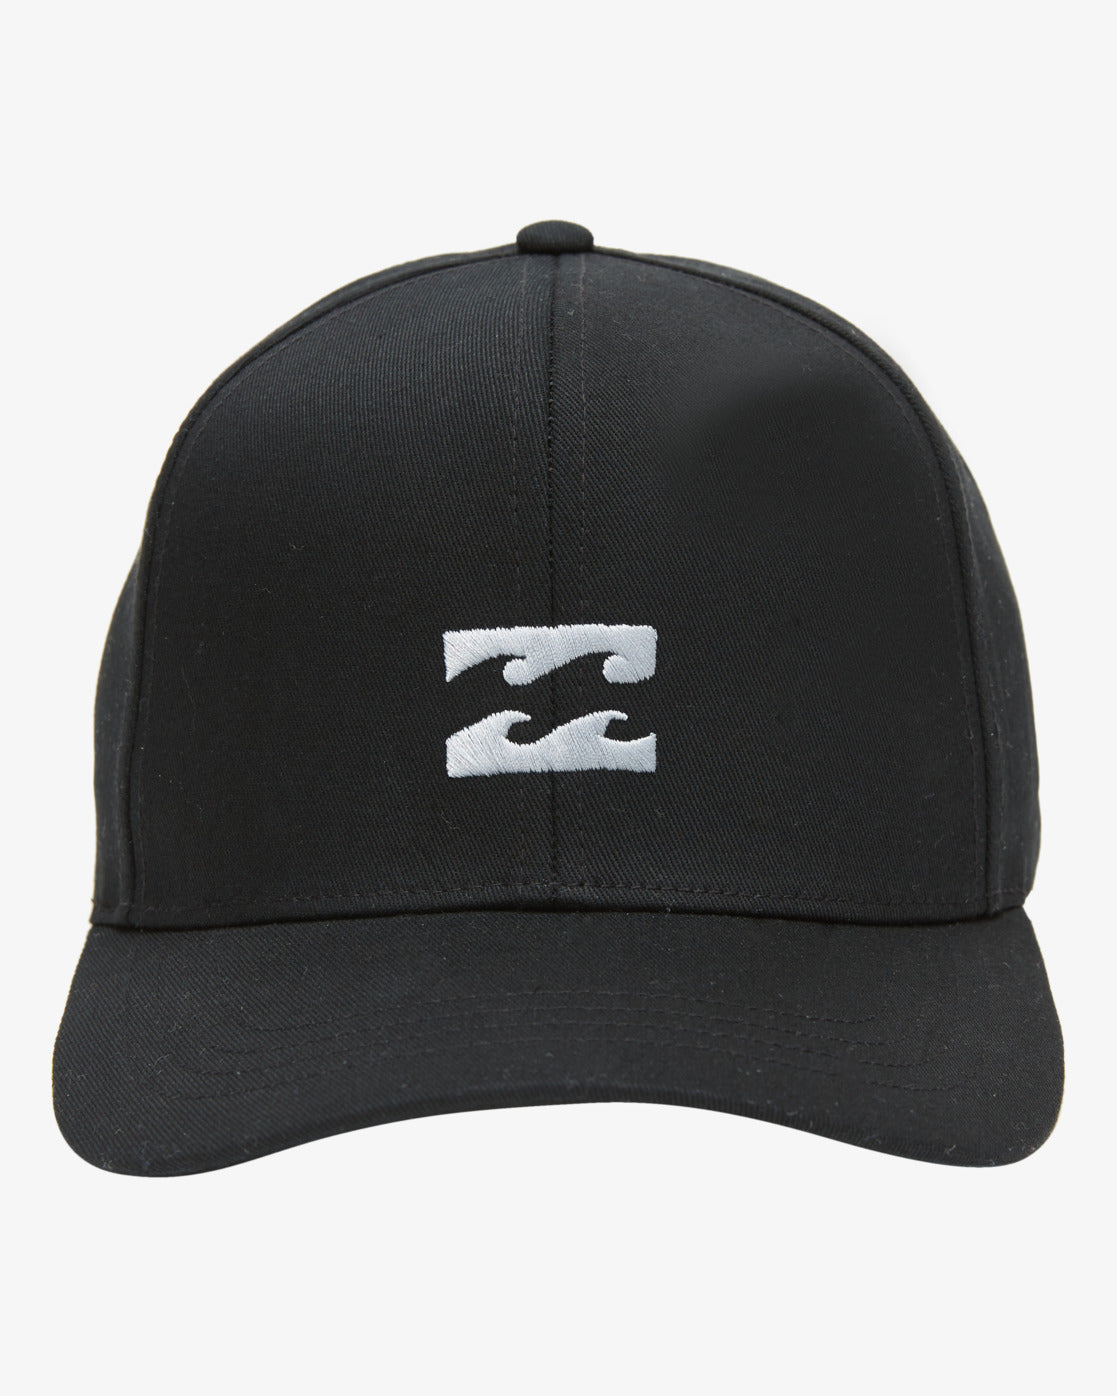 All Day Snapback Hat - STEALTH